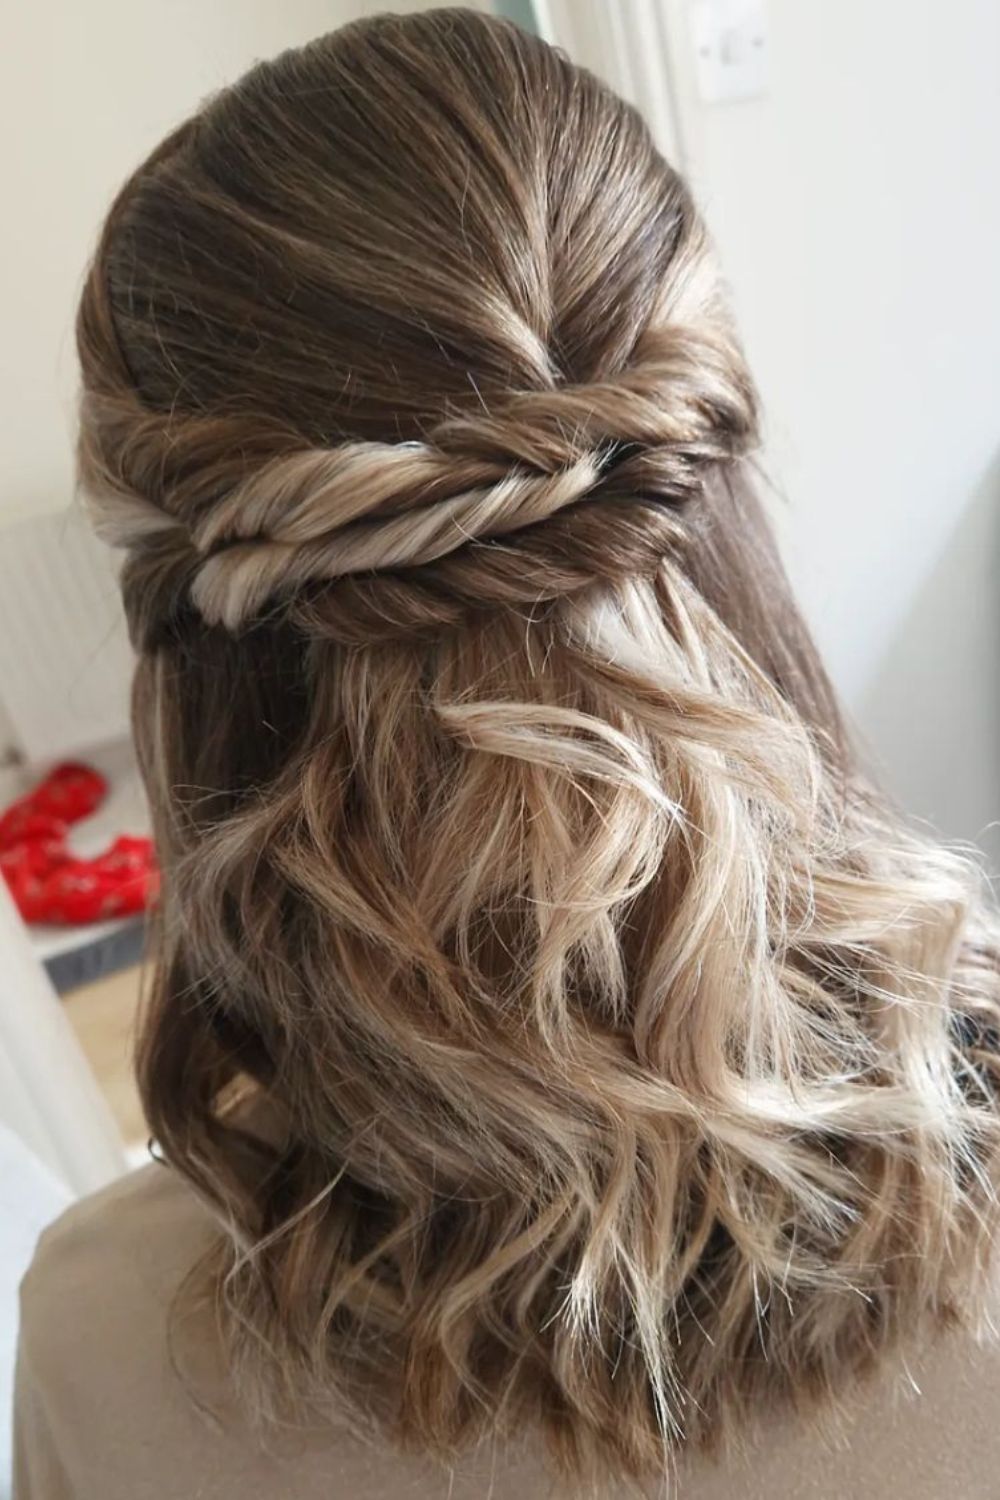 A woman with a medium-length half up half down twisted updo.